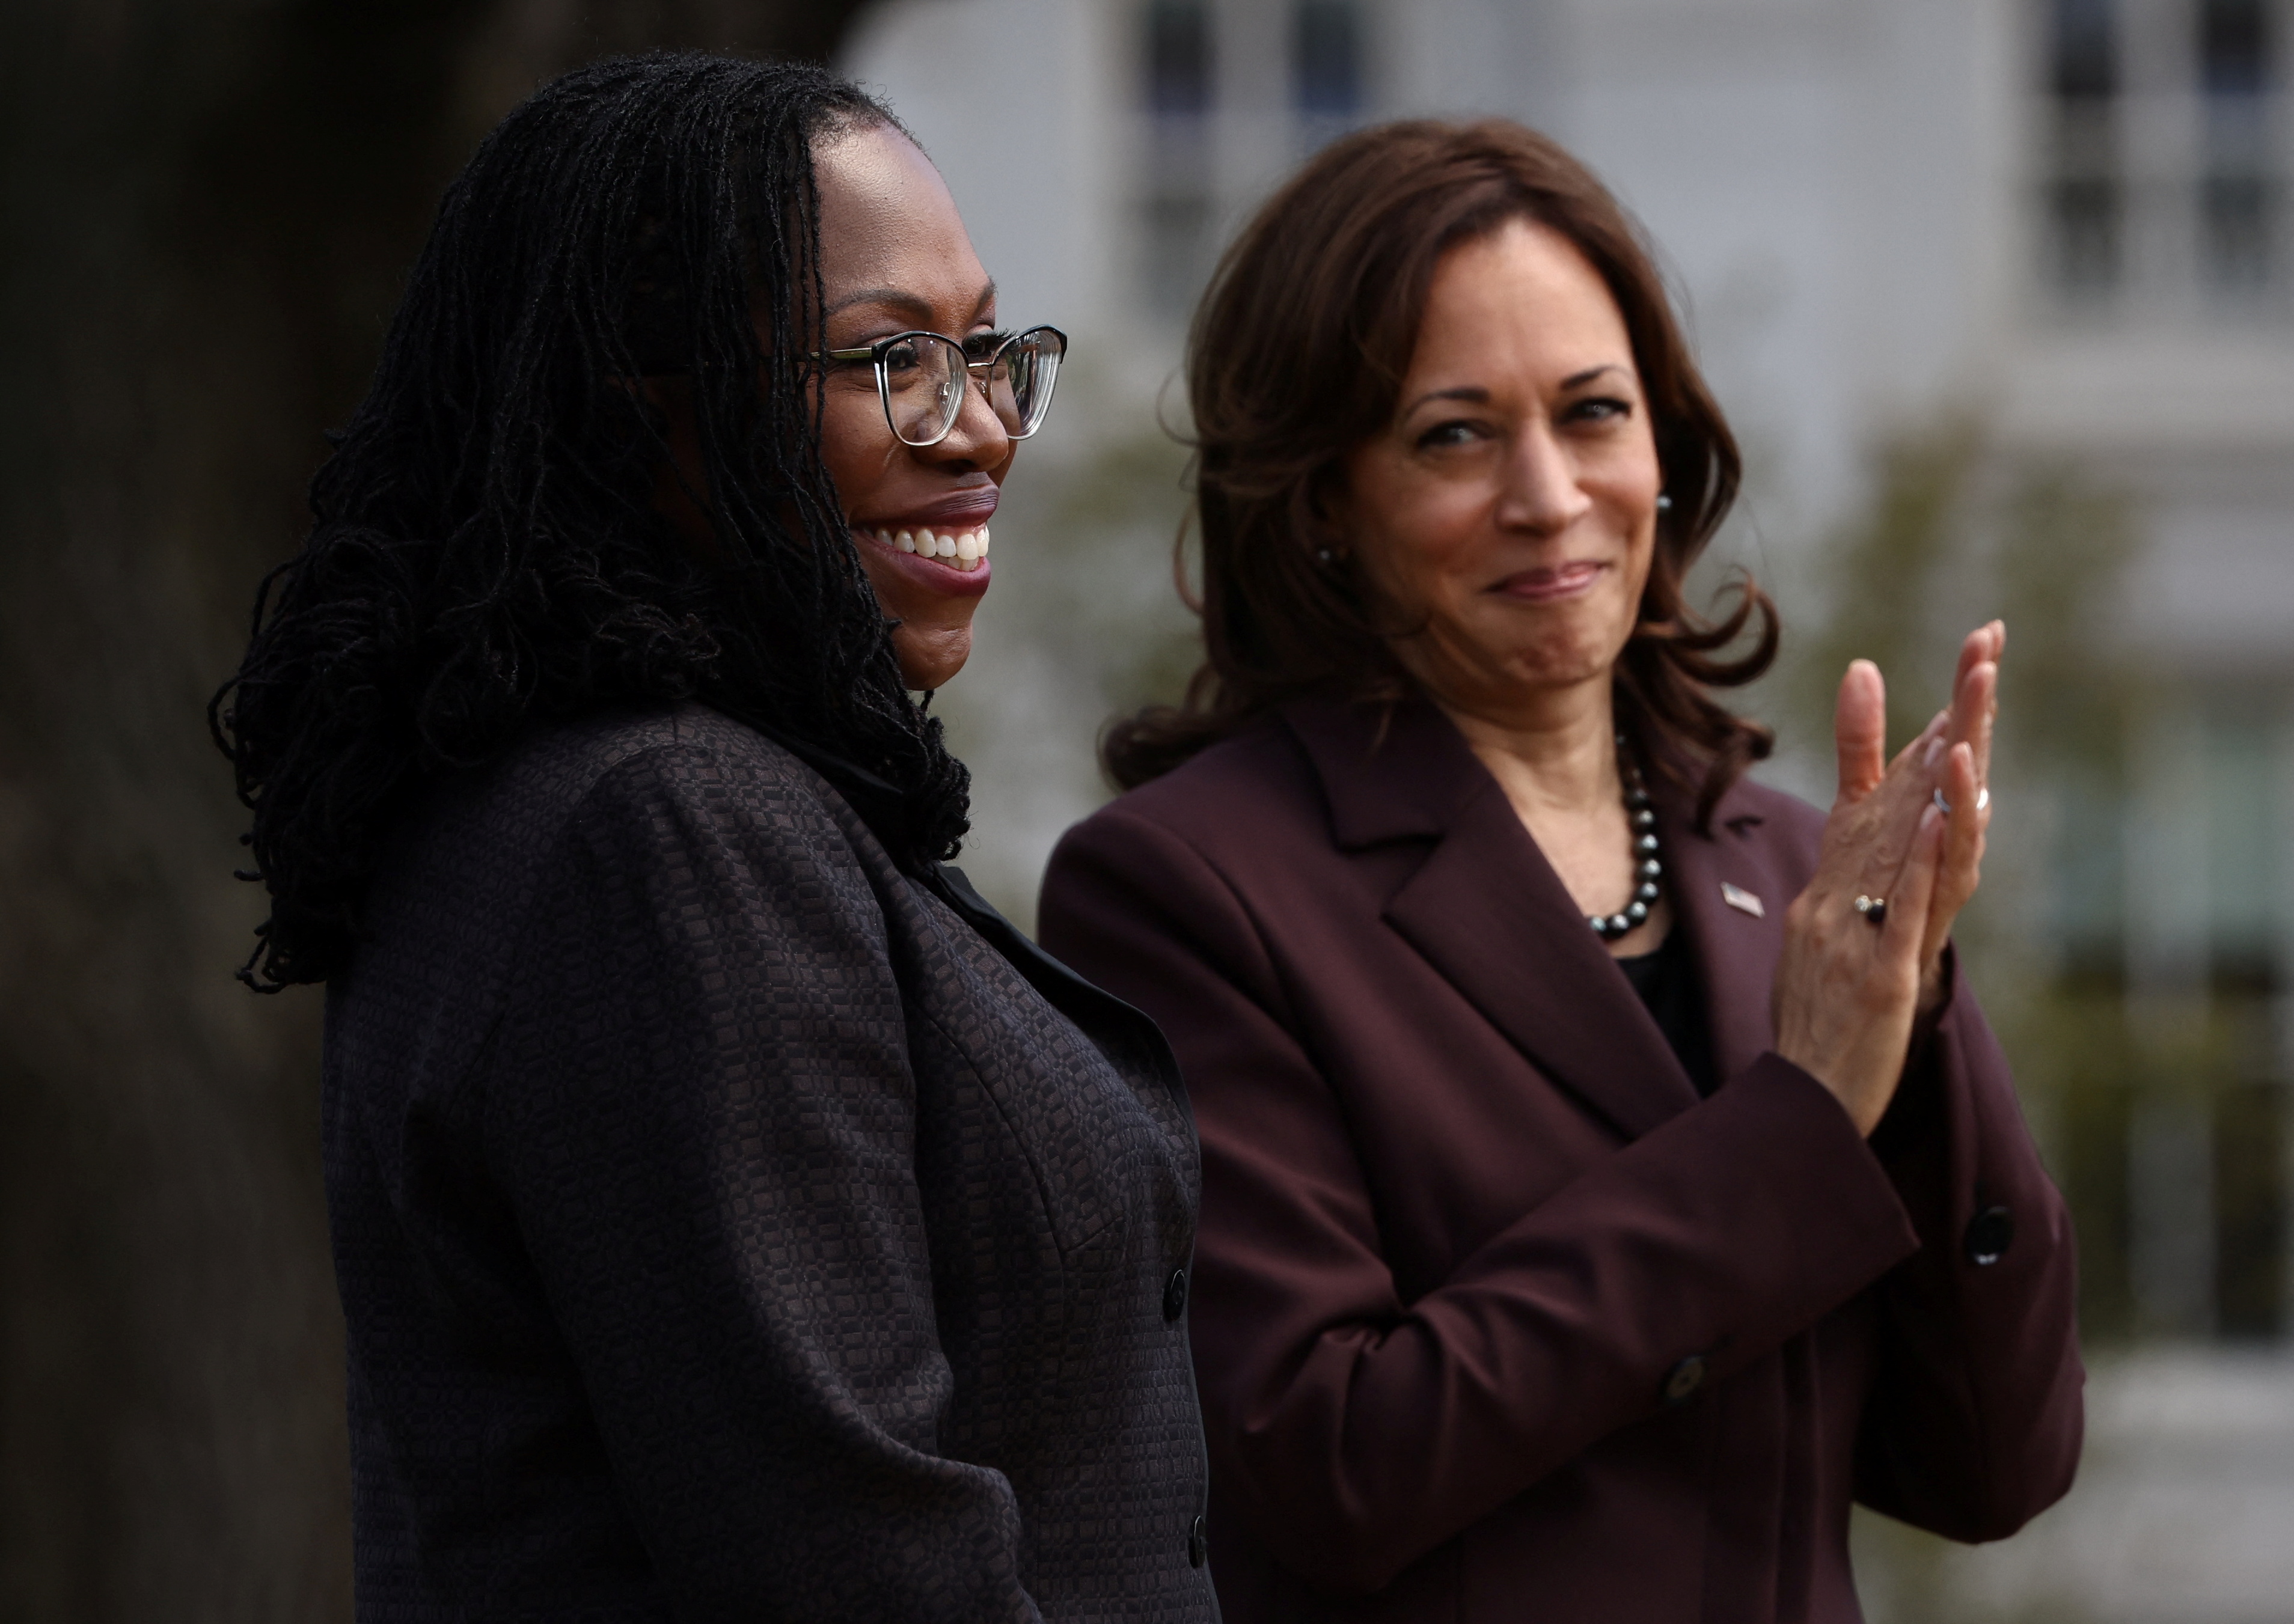 'We've made it': historic Supreme Court pick Jackson lauded at White ...